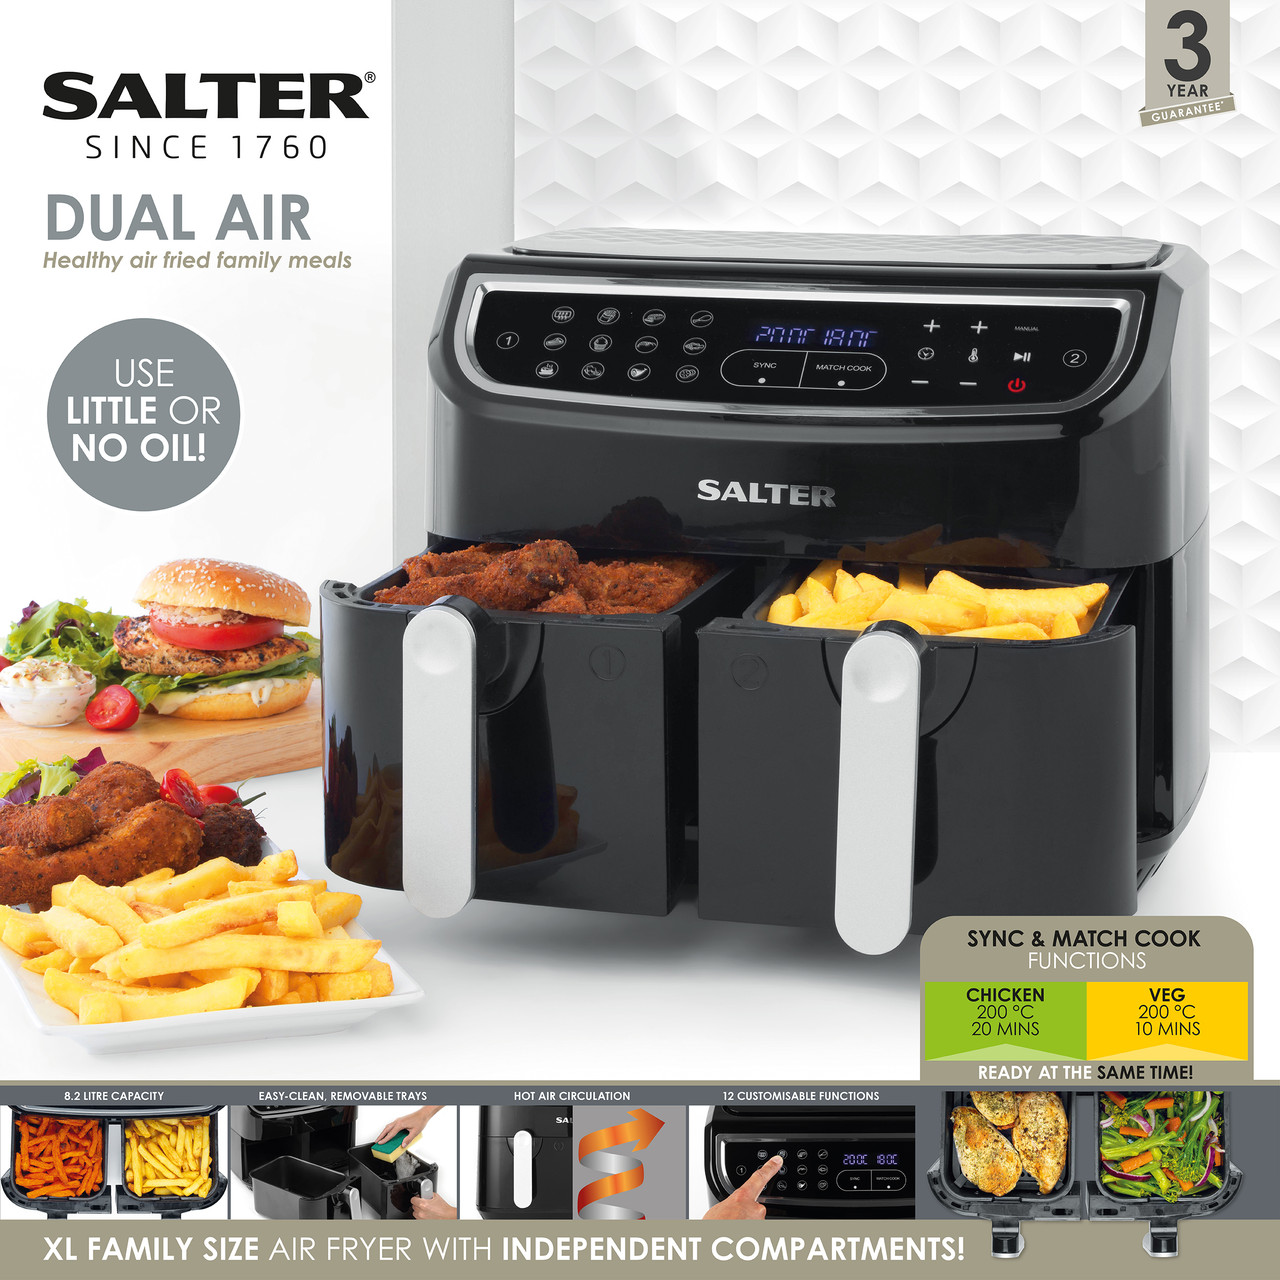 Dual Air Fryer With 12 Cooking Functions, 8.2 Litre